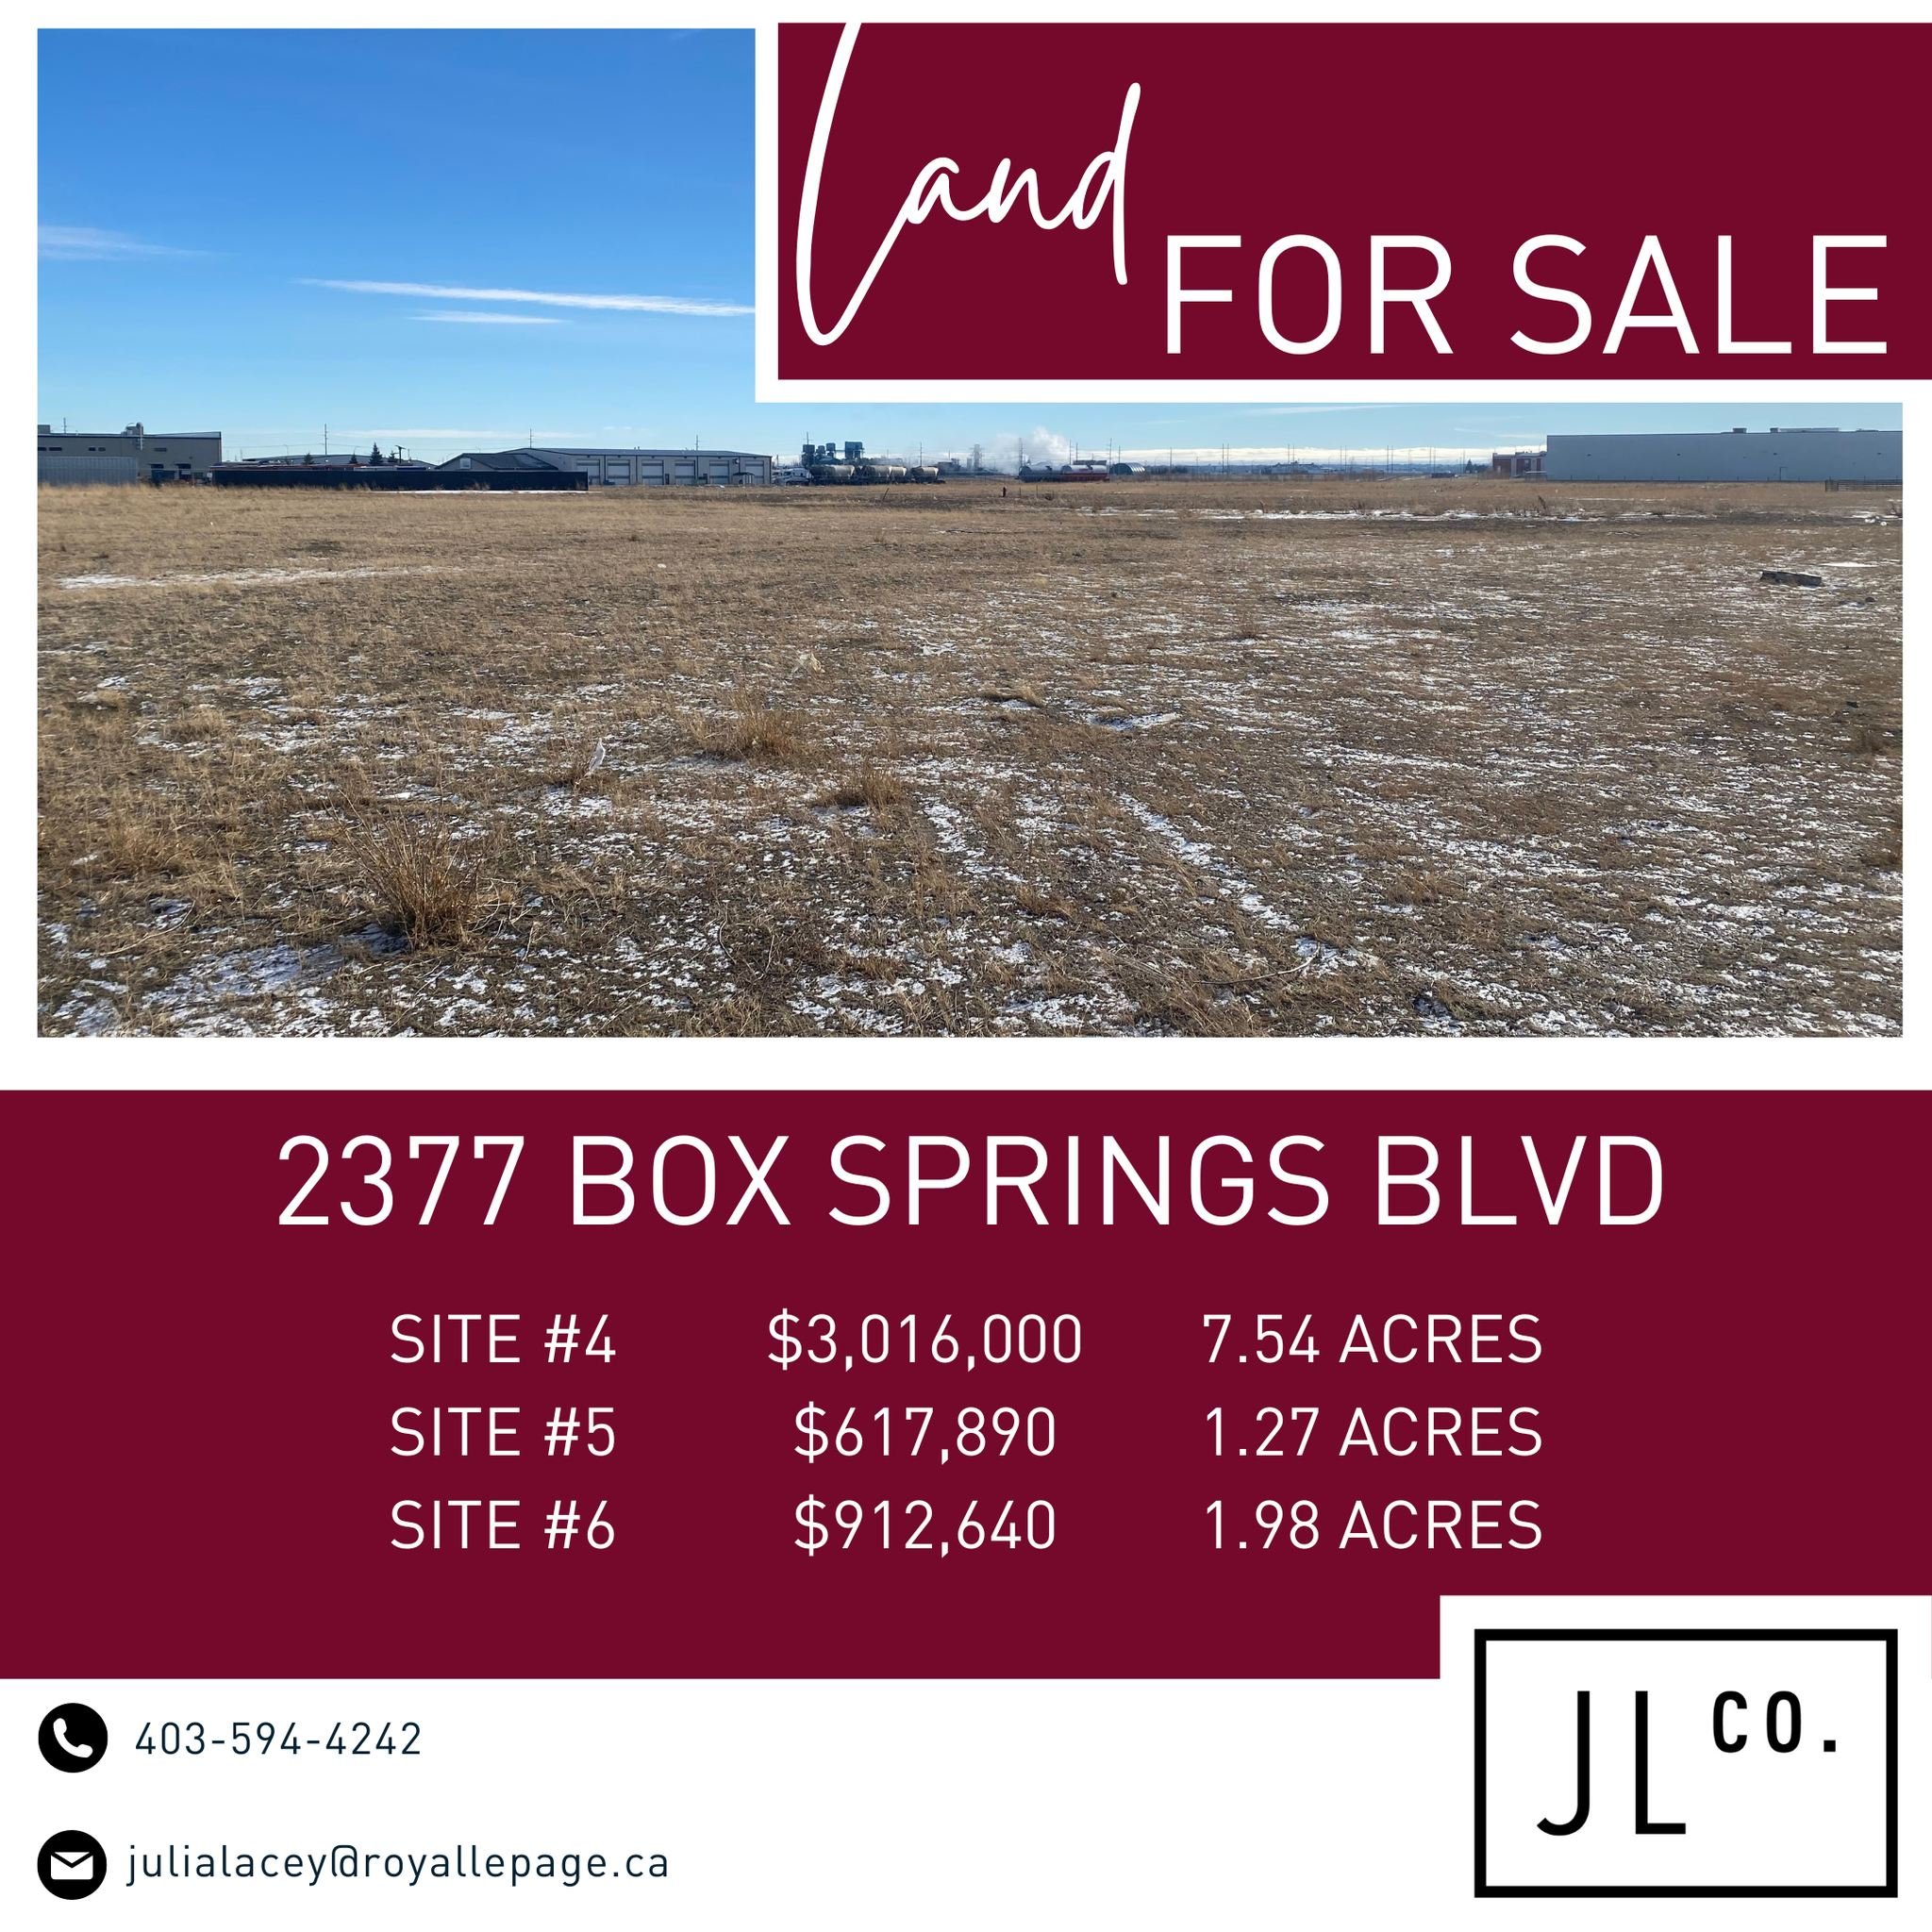 Land For Sale!
2377 Box Springs Blvd. NW

SERVICED land just off Highway #1. Located on the corner of Box Springs Blvd and Box Springs Link, this parcel of land is directly across from Costco . It is fully serviced, the off site levies have been paid